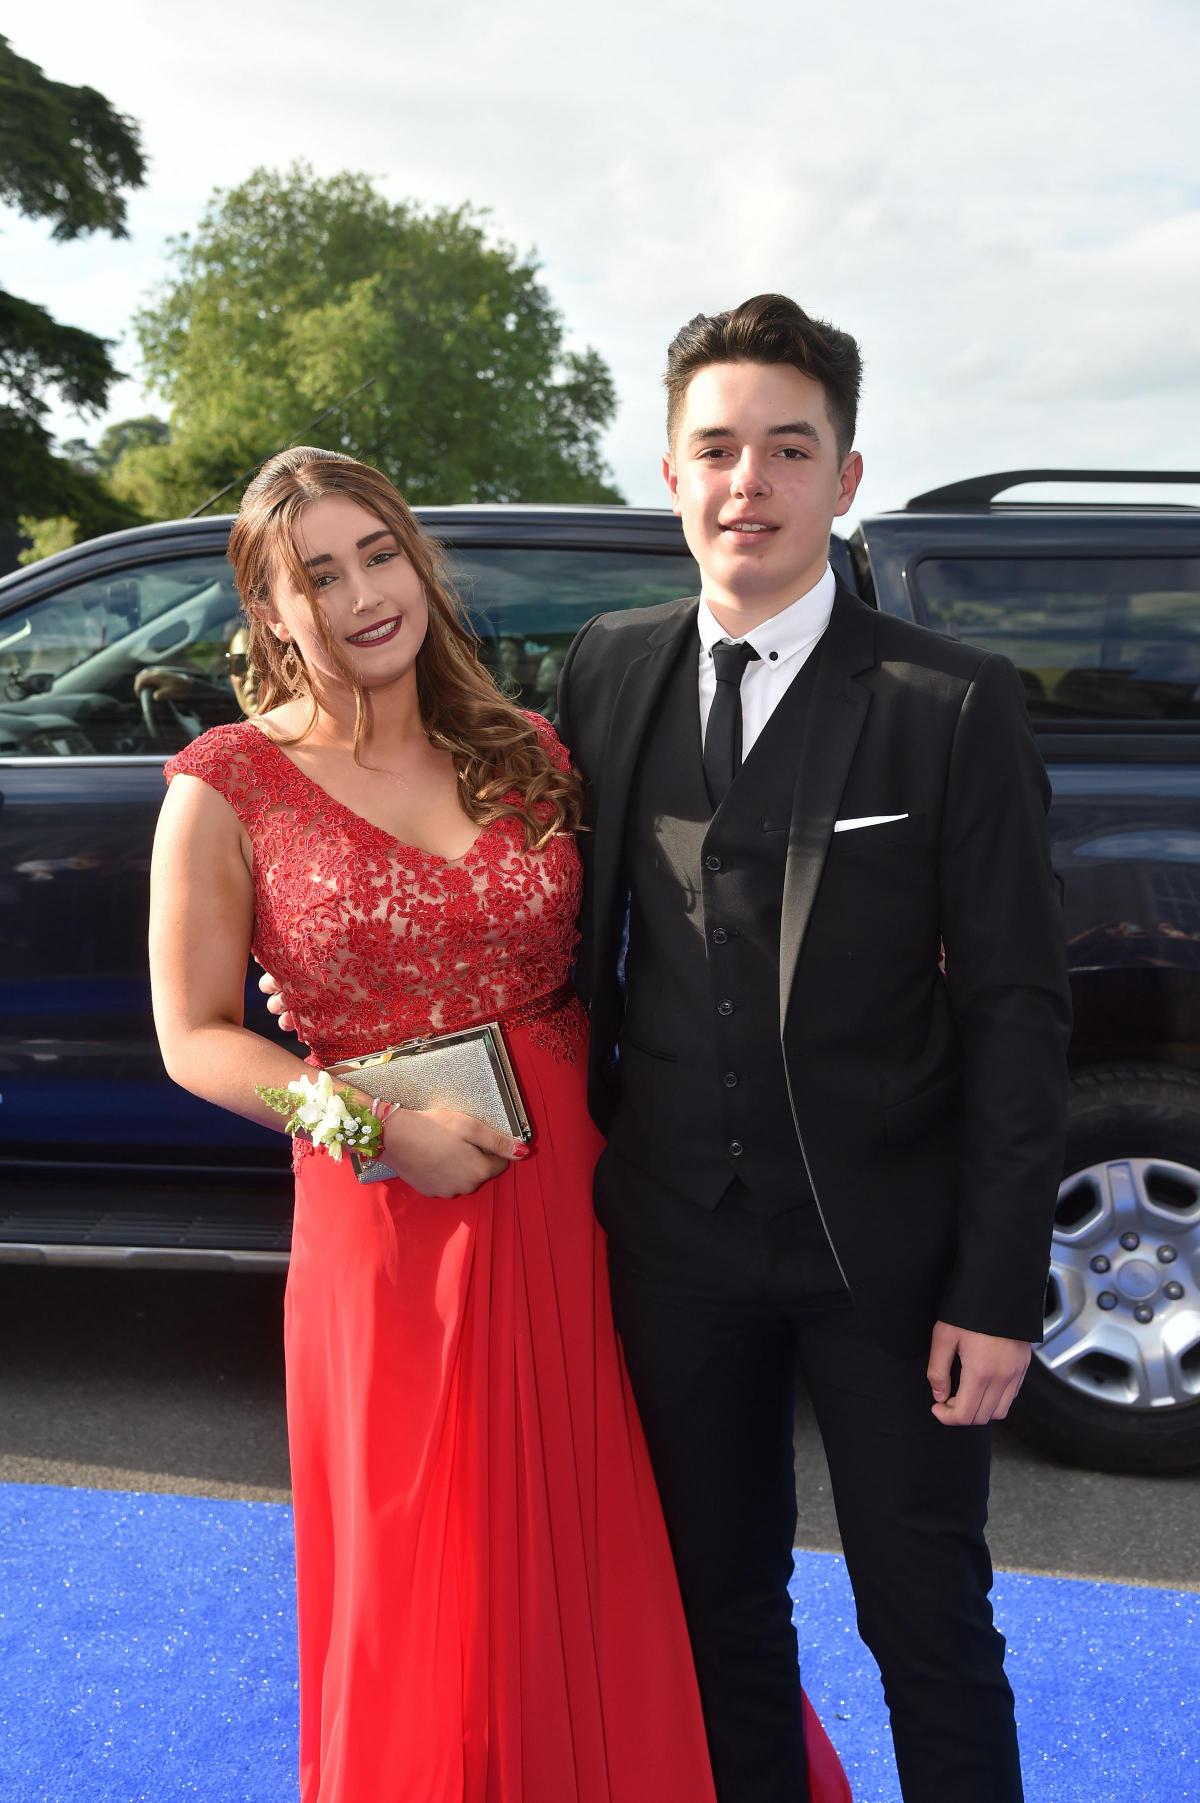 Wey Valley Year 11 Prom 2016